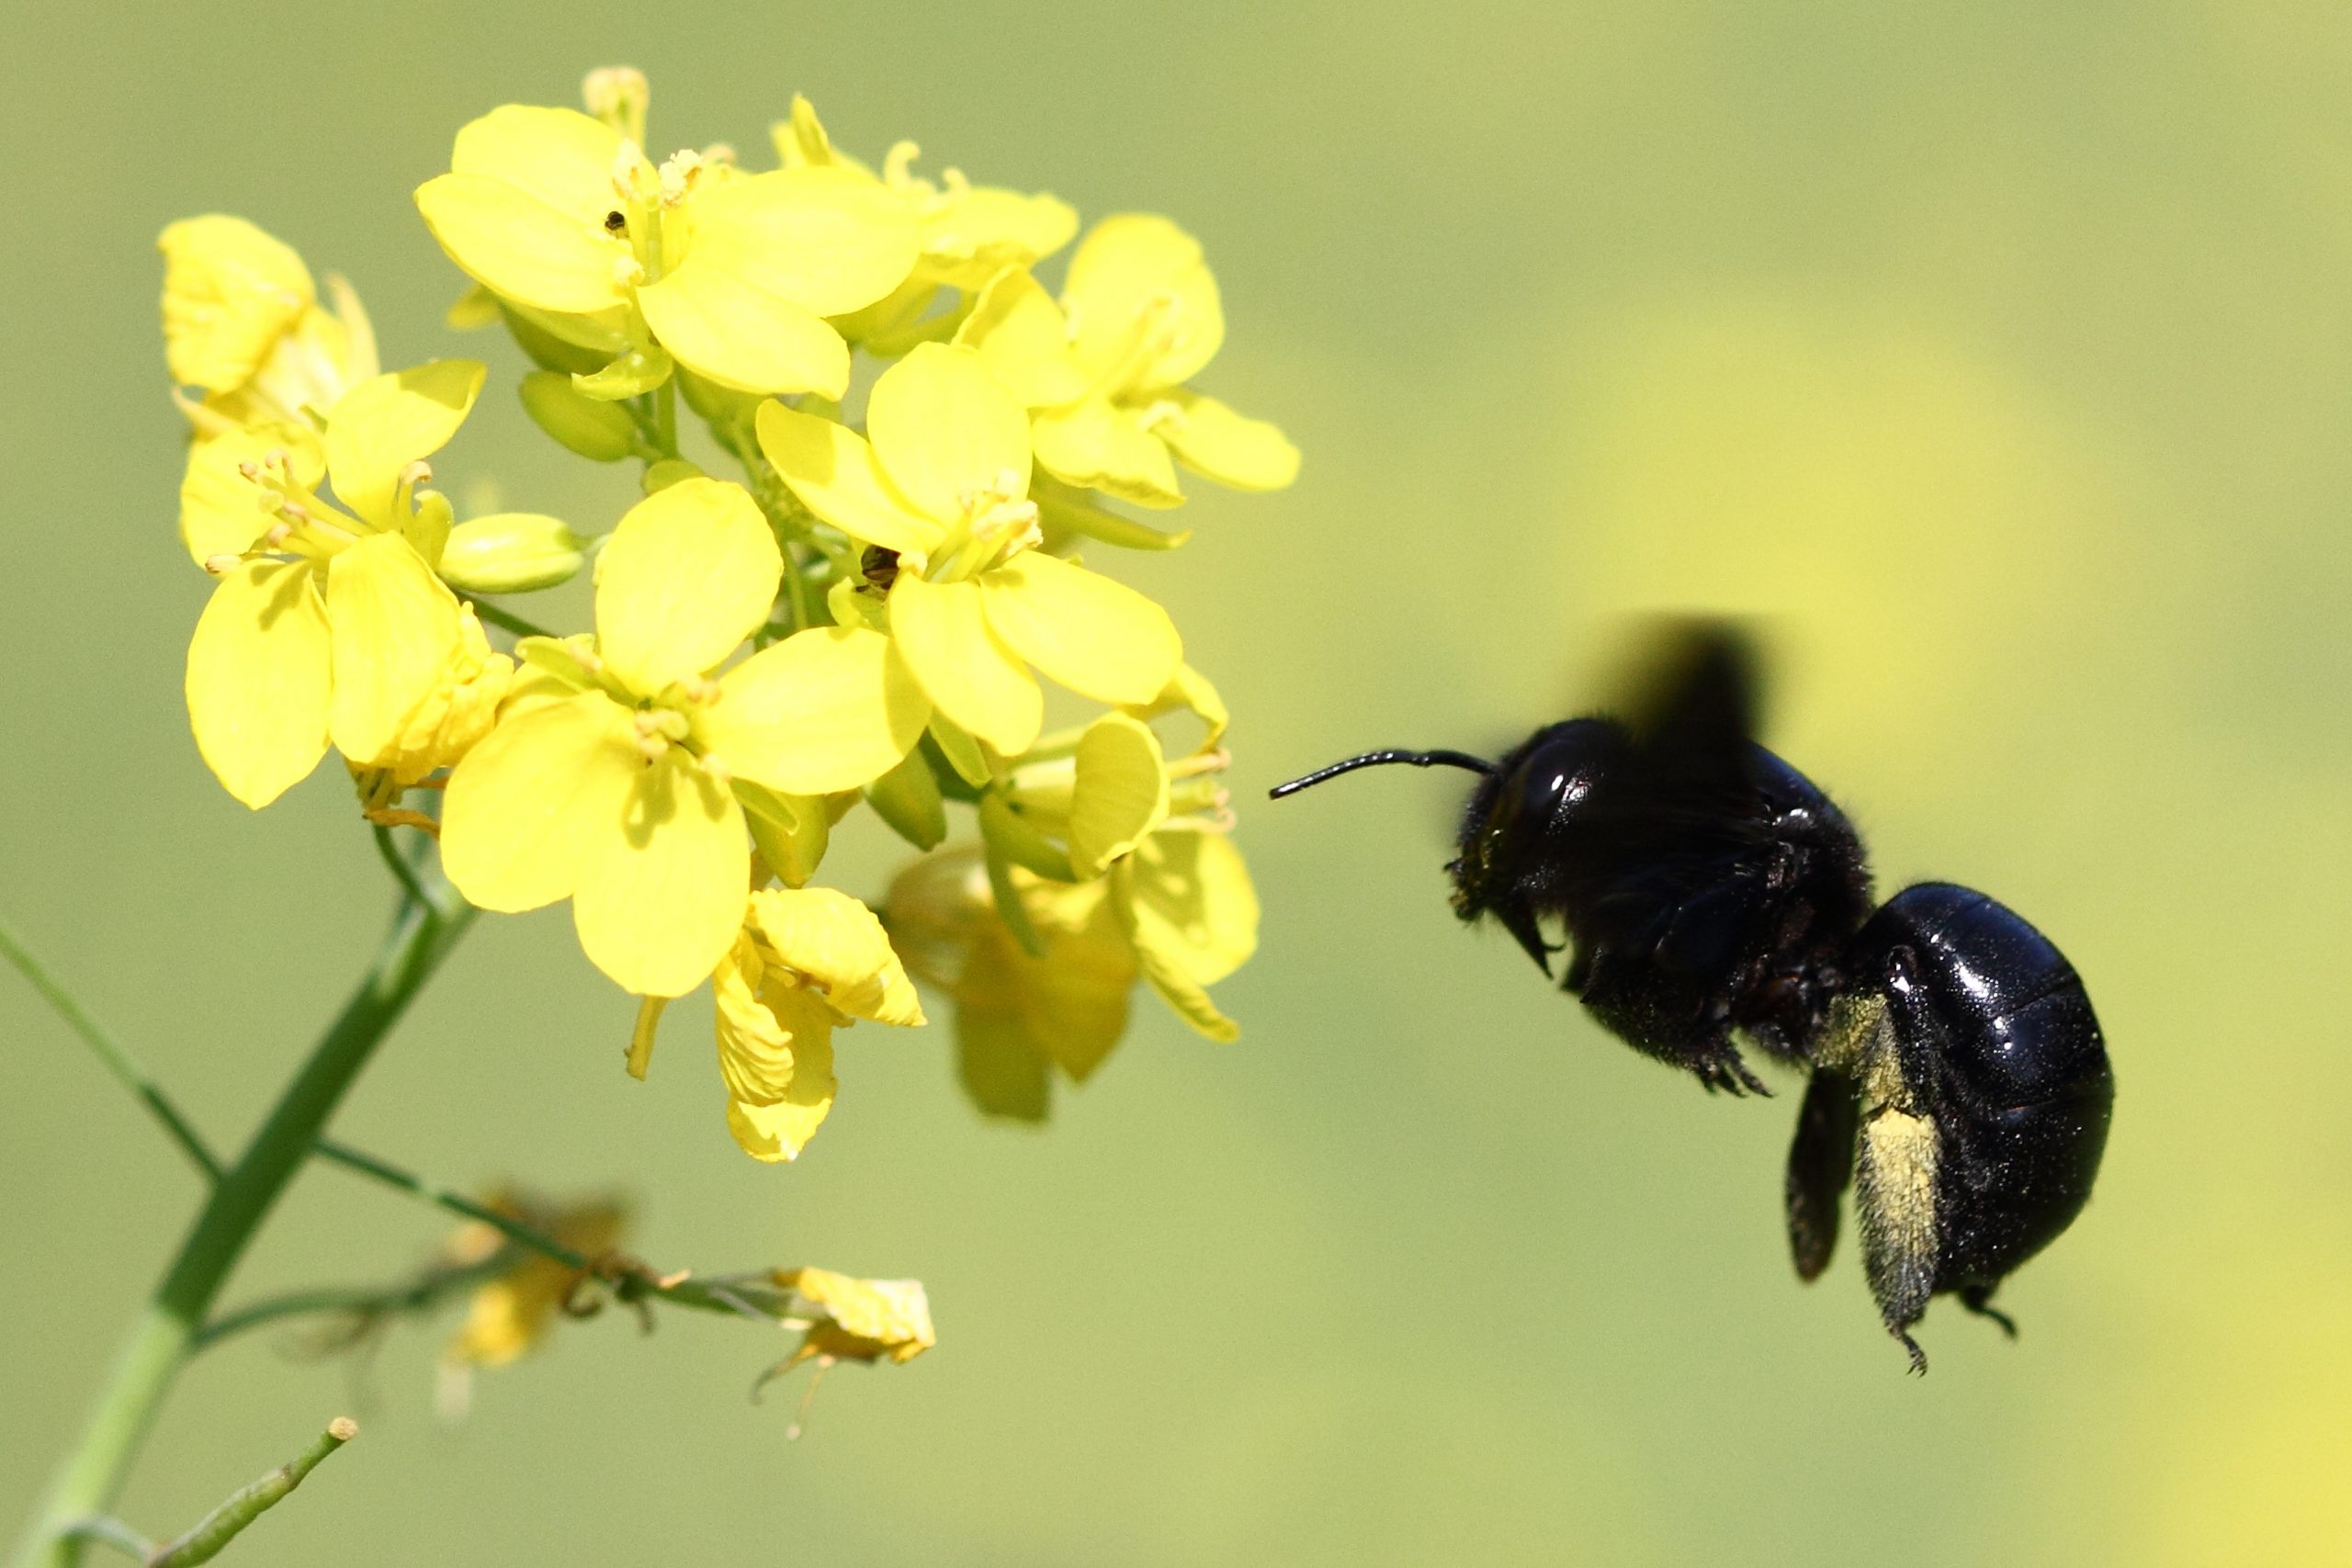 A carpenter bee hovering